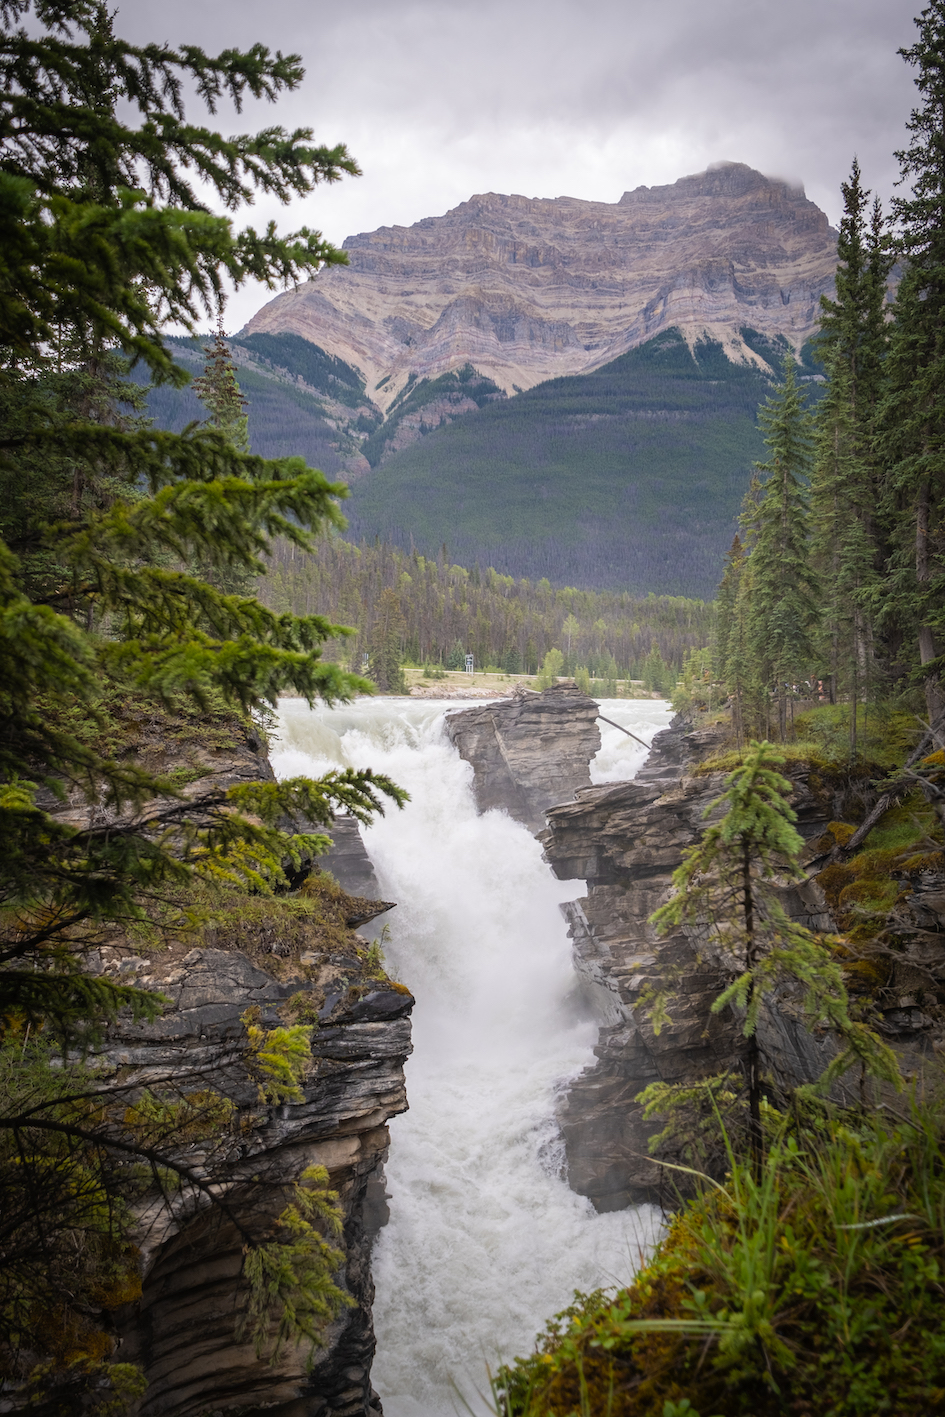 Unique Features of Athabasca Falls